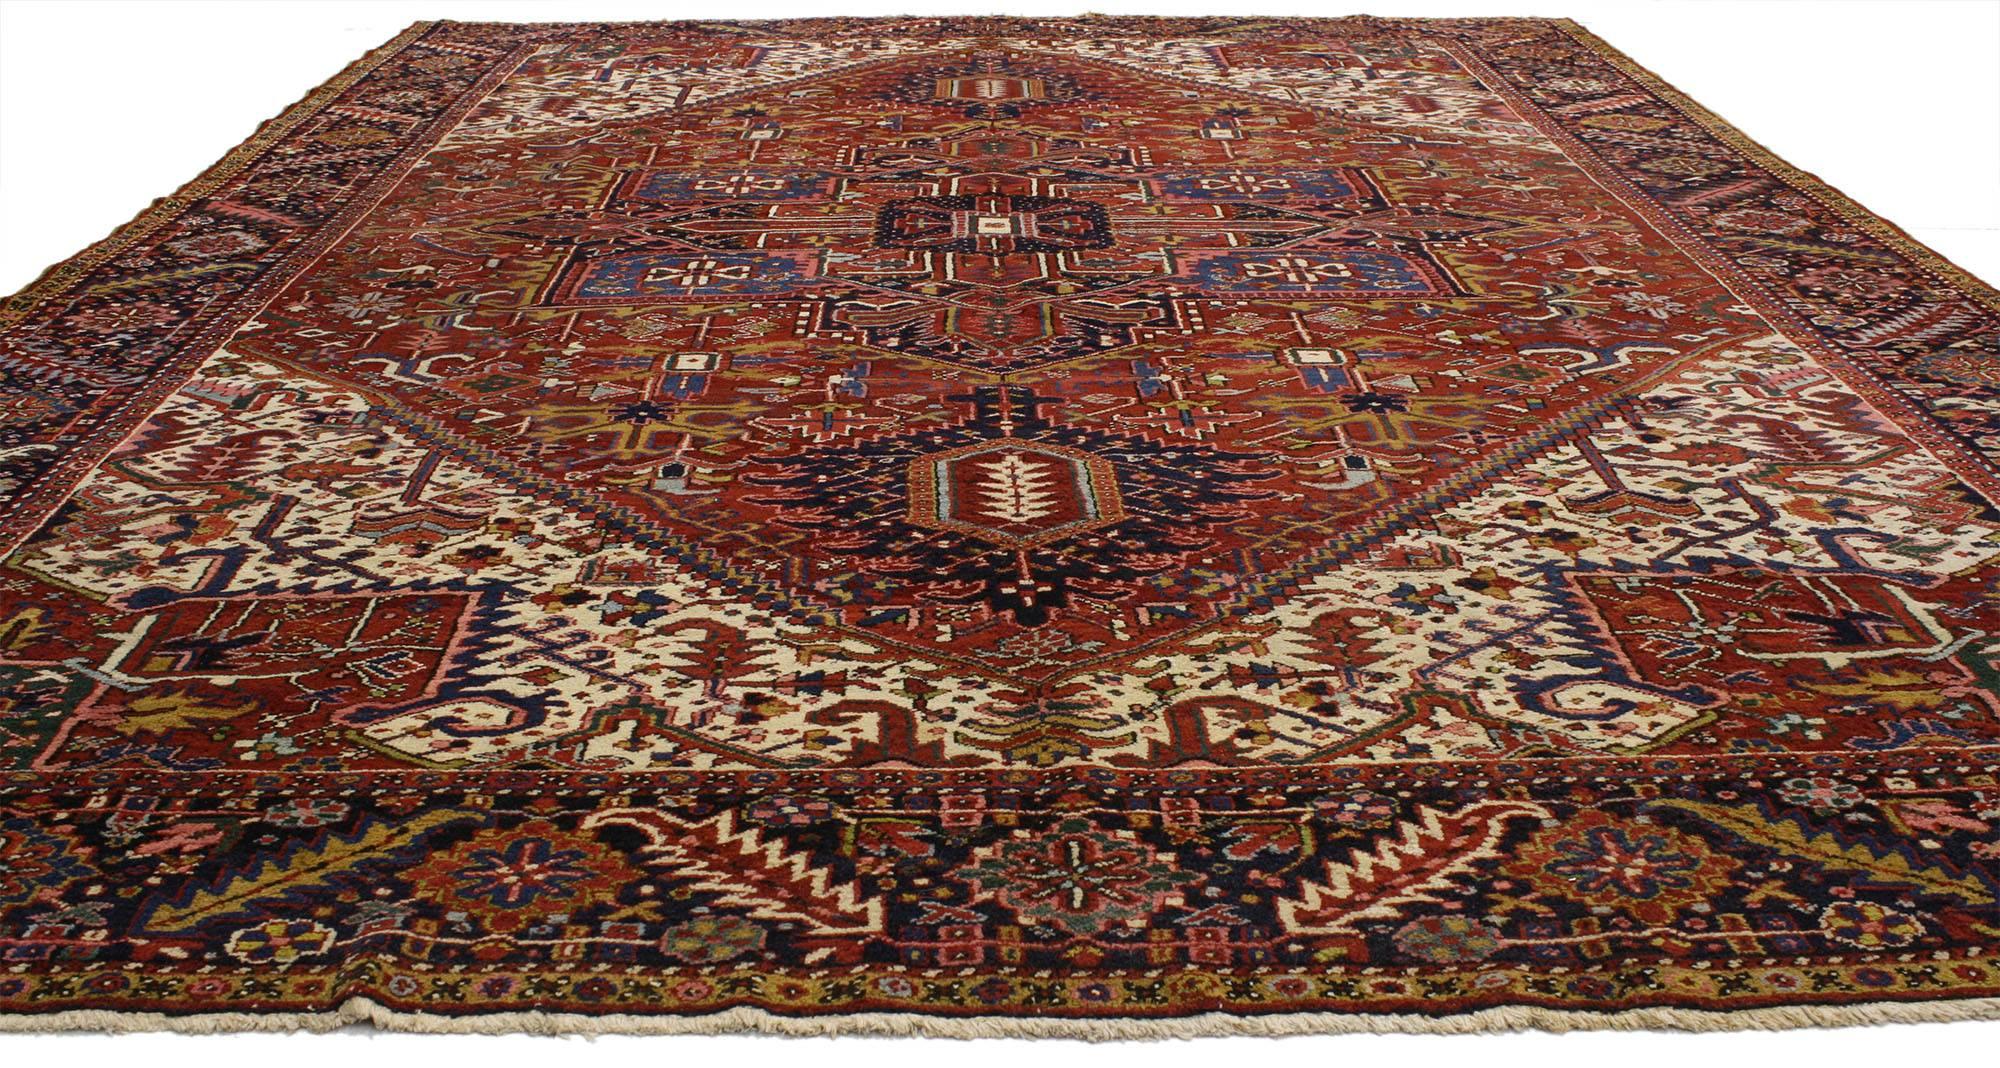 77030, antique Persian Heriz area rug. Artfully hand-knotted from high quality wool, this hand-knotted wool antique Persian Heriz rug features a classic traditional style comprised of a prominent central medallion flanked with two cartouche finials